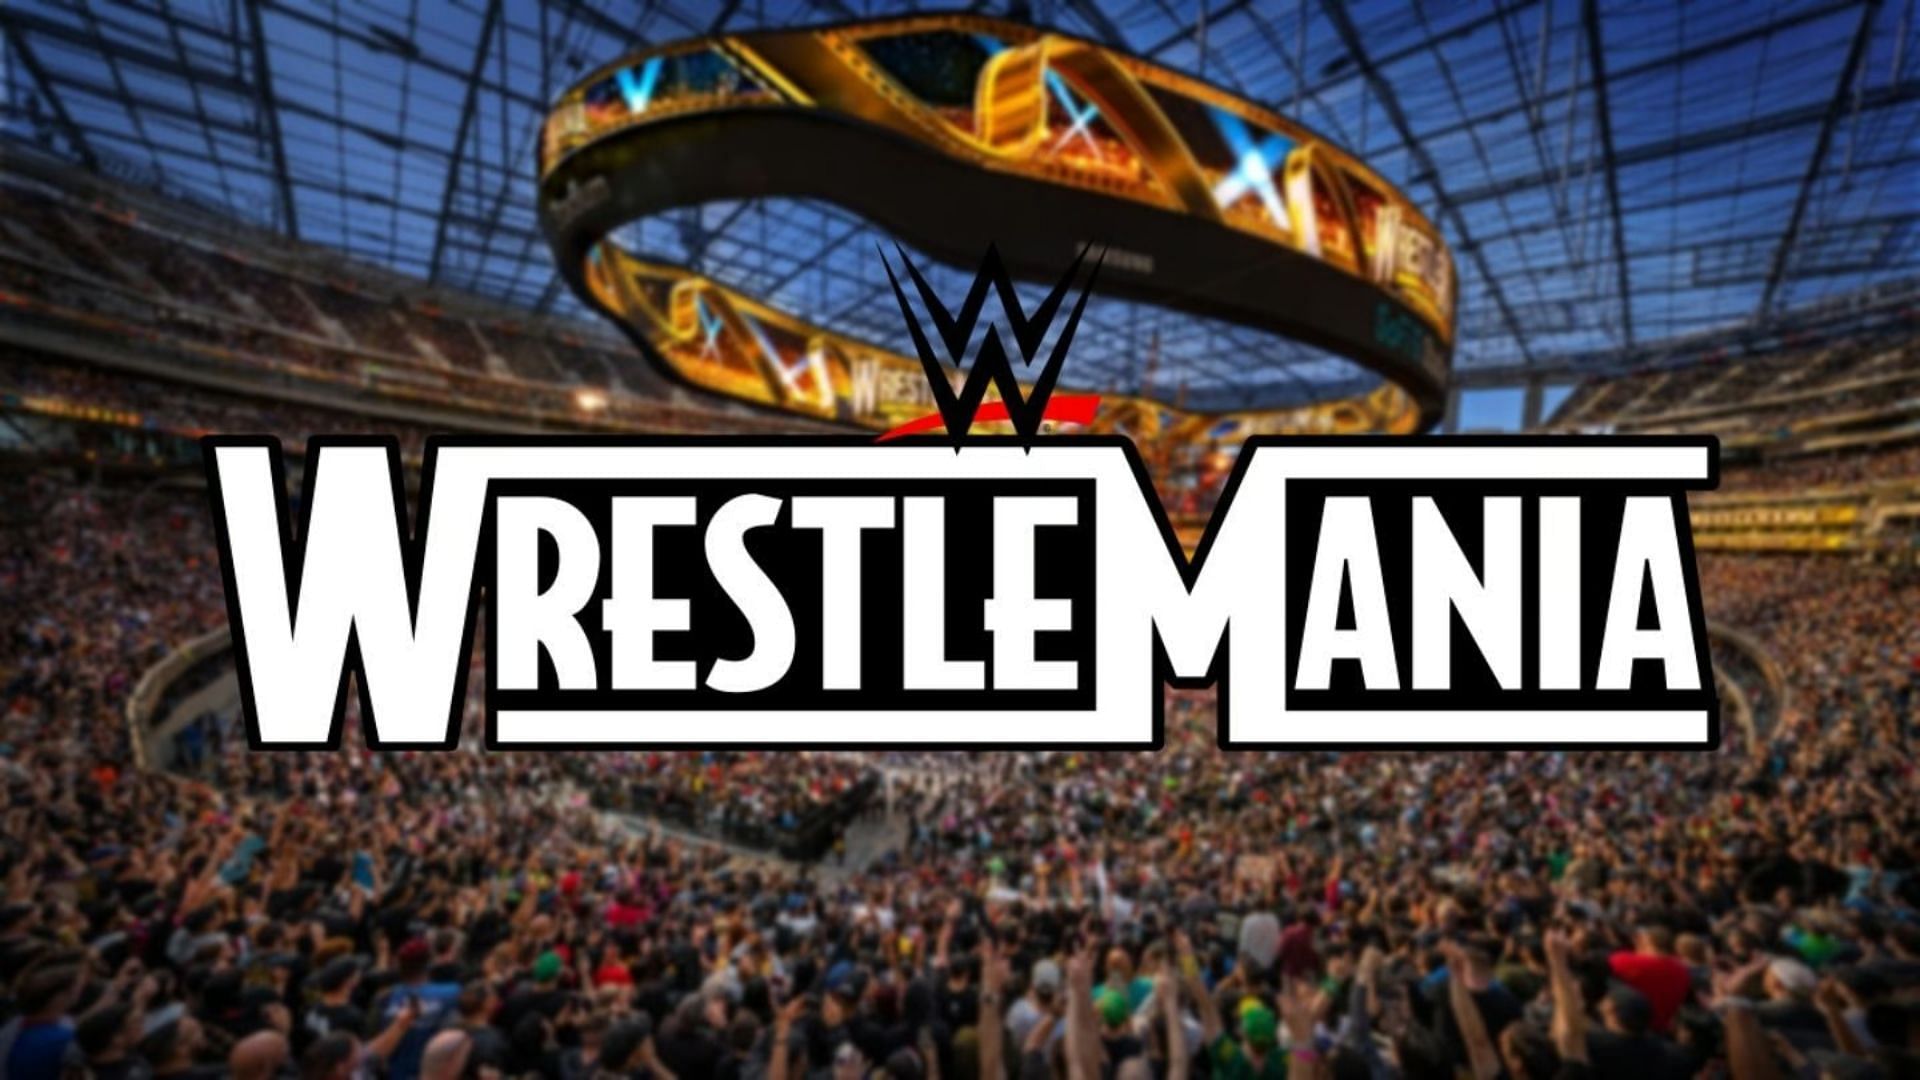 WrestleMania 39 recently took place at SoFi Stadium in Los Angeles